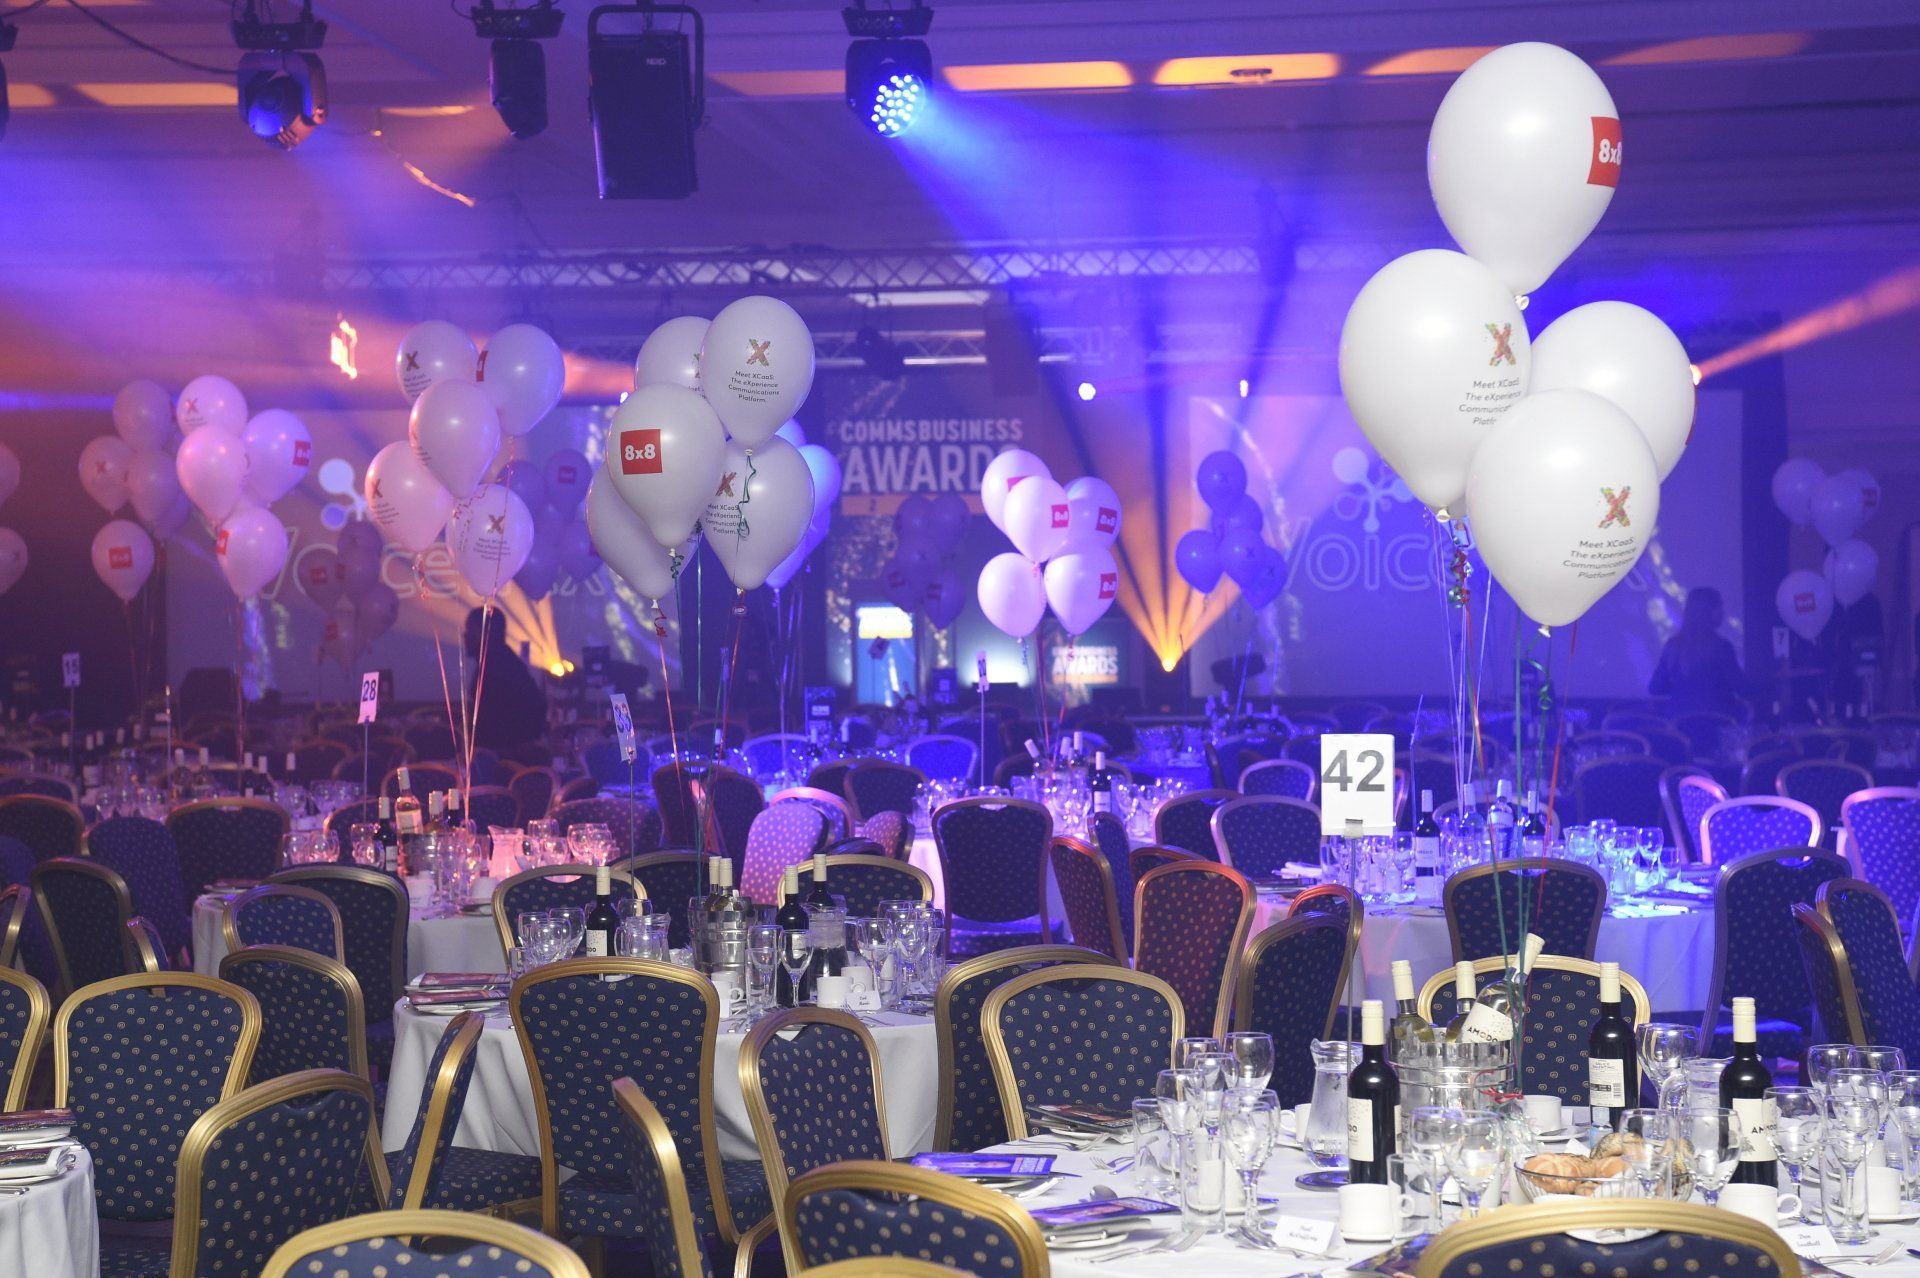 COMMS BUSINESS AWARDS